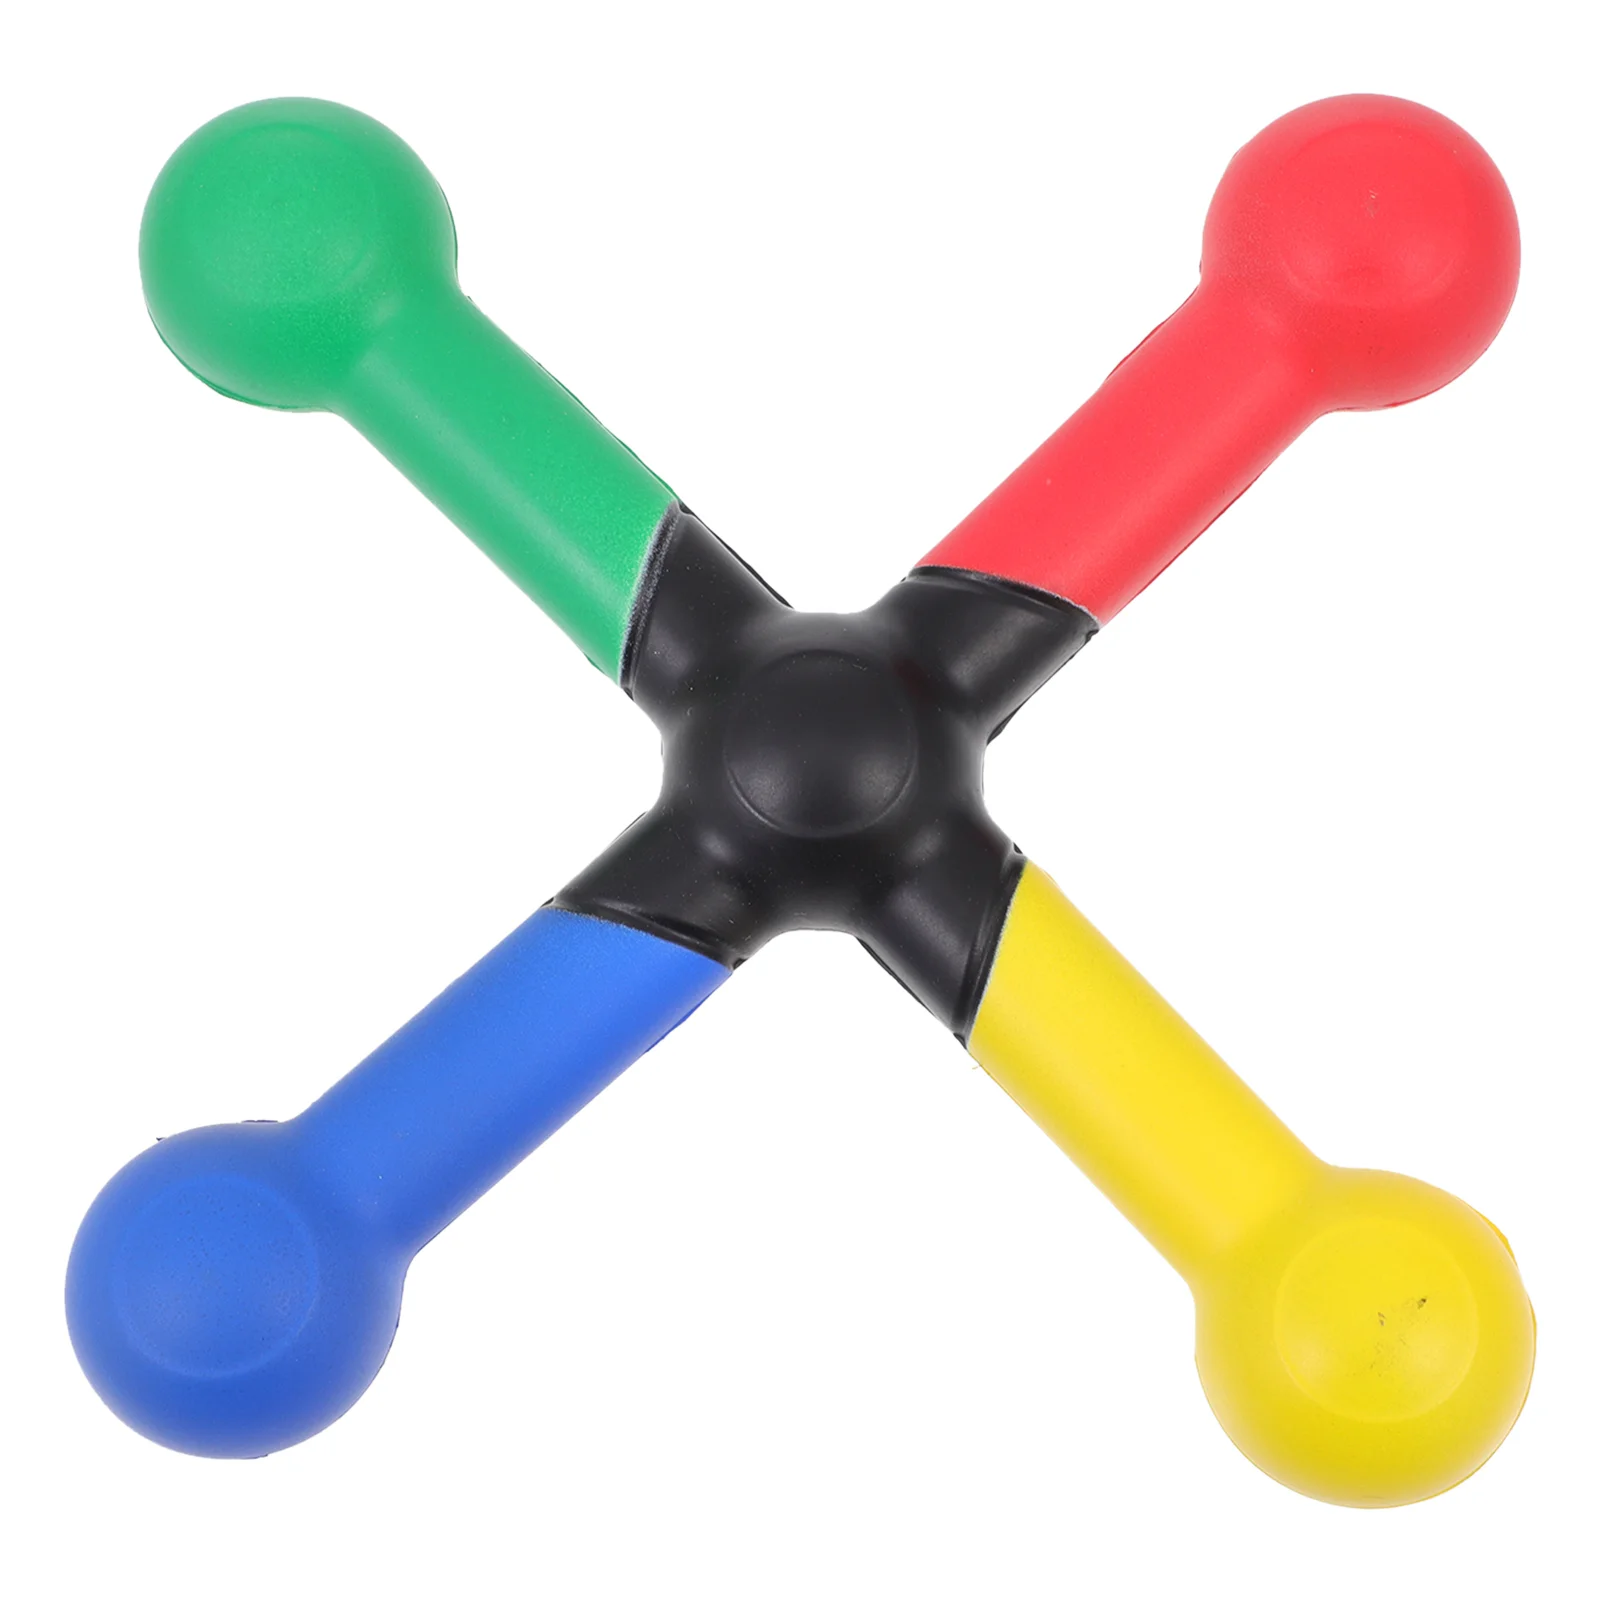 

Stick Training Toy Tool Eye Hand Coordination Trainer Reaction Agility Improving Catching Reflex Colored Catch Ability